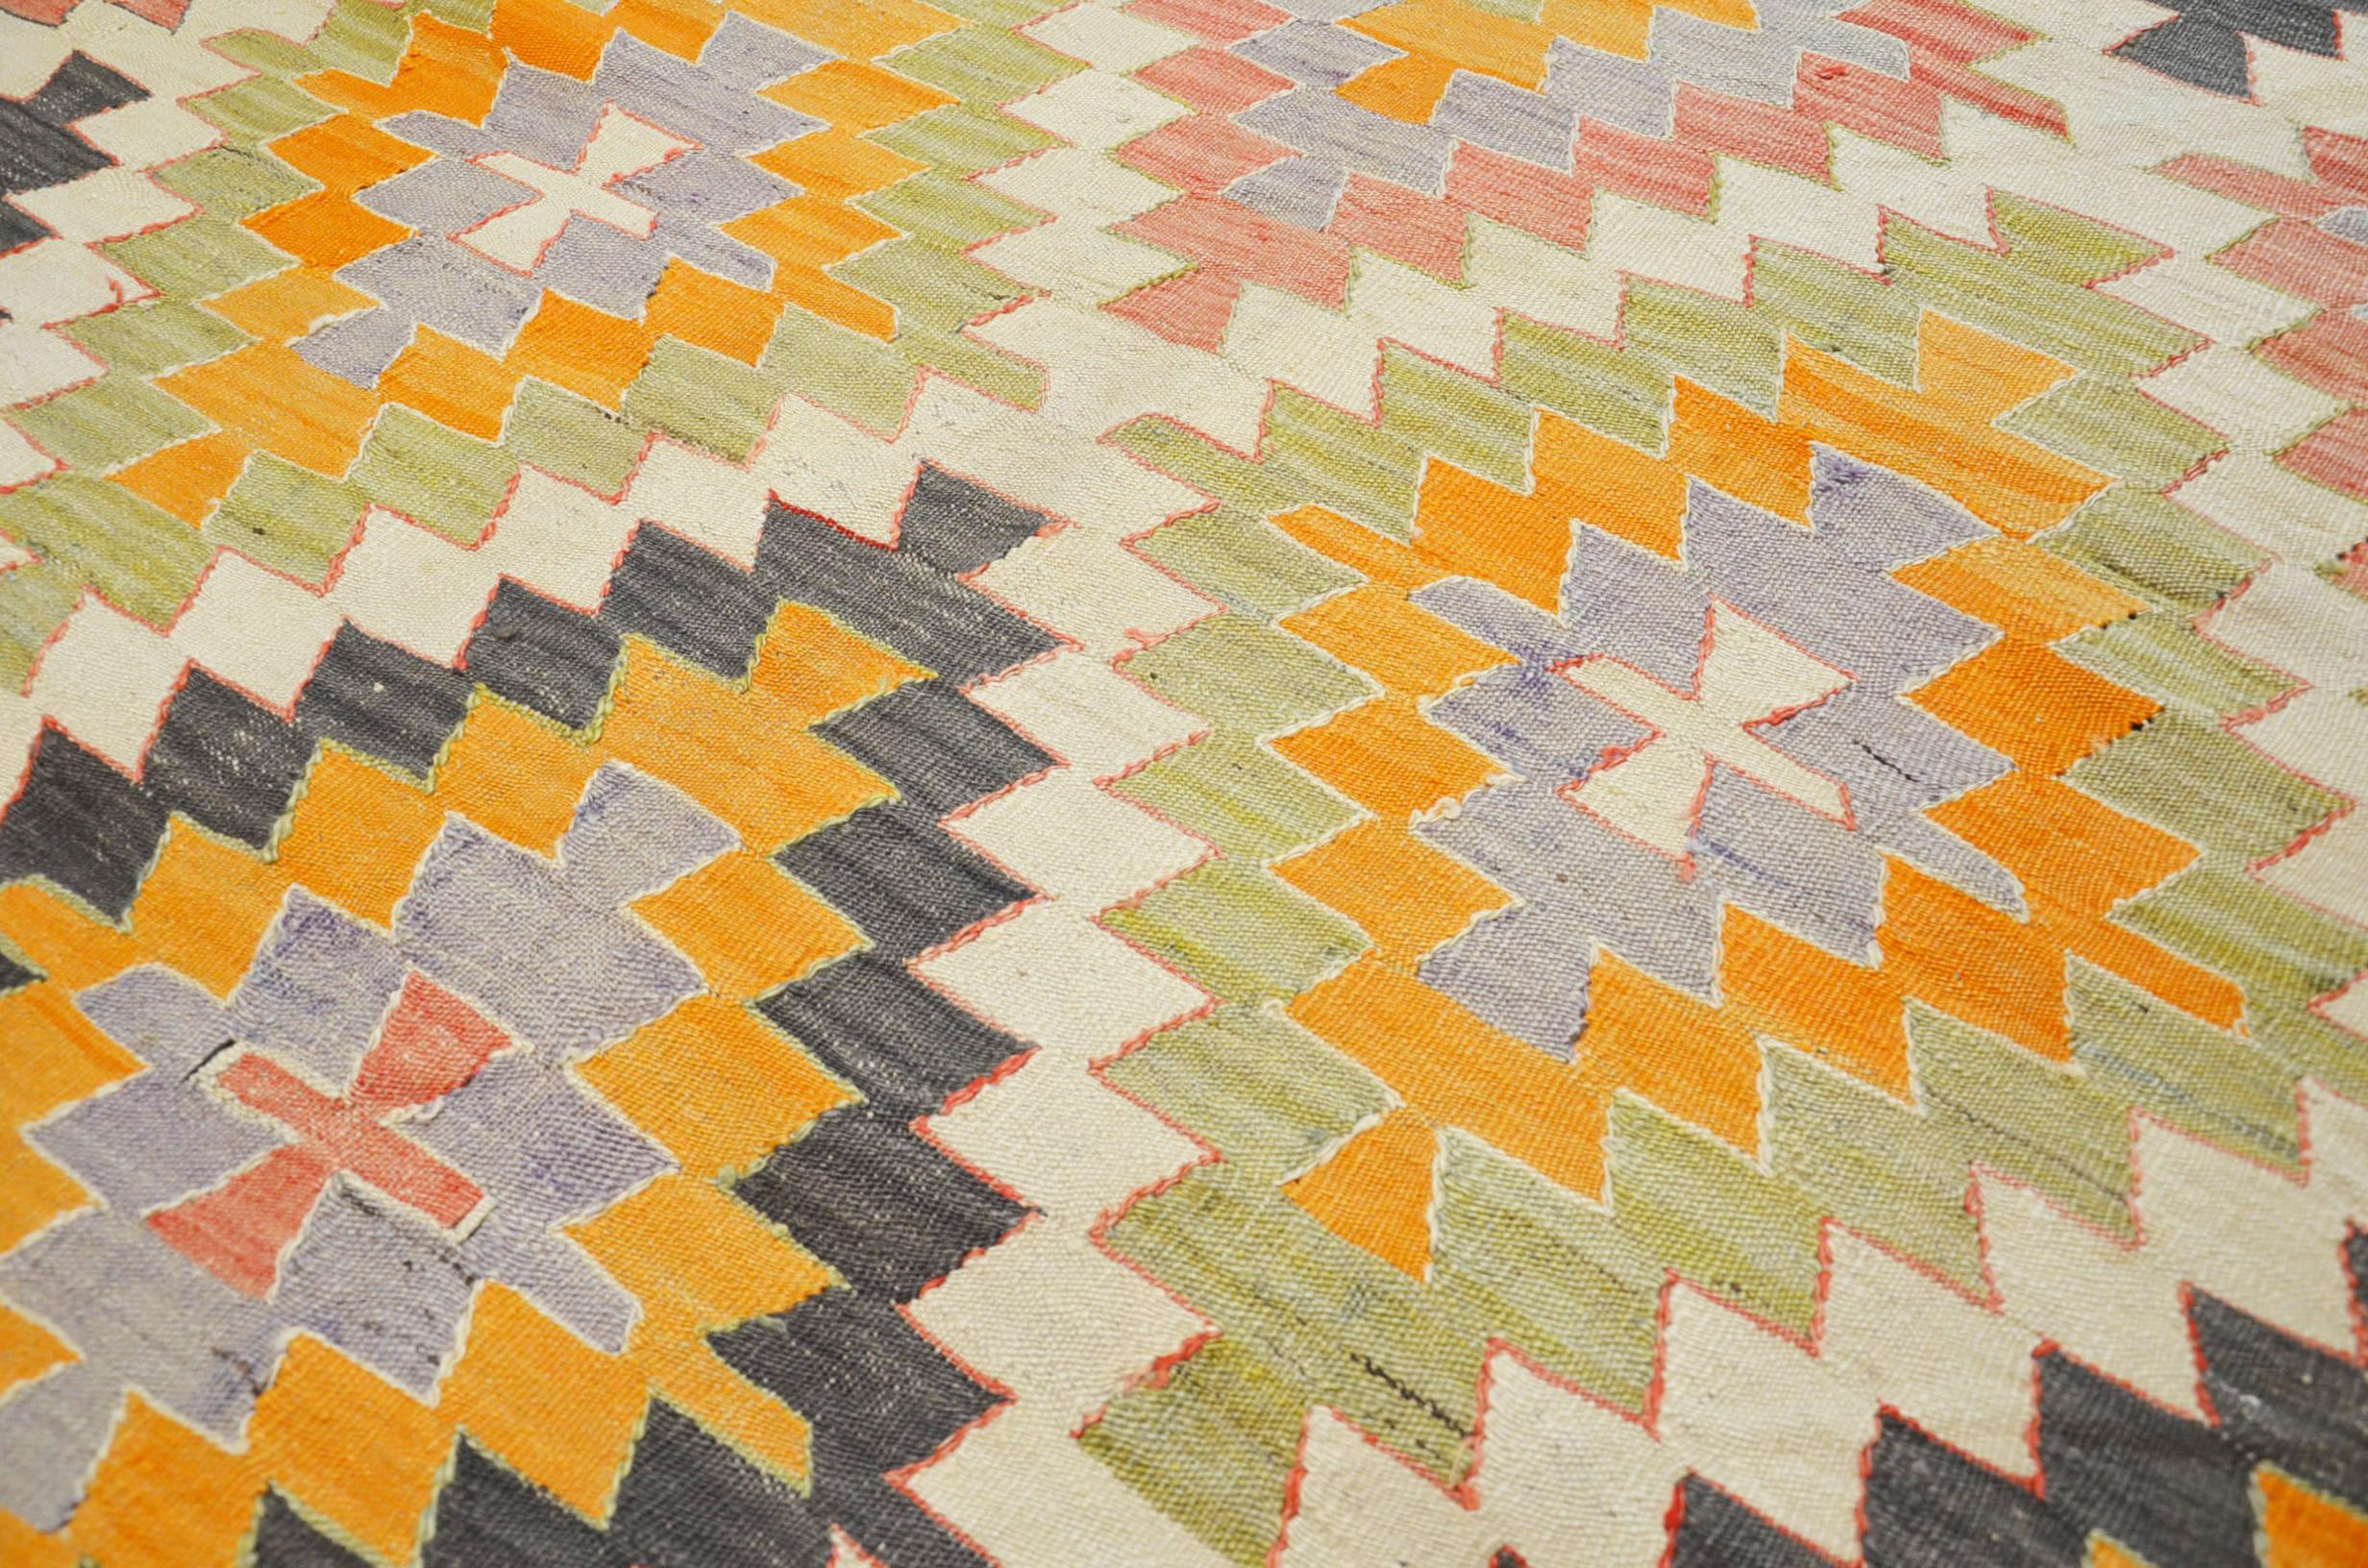 - Classic Kilim made of wool.
- Its style is characterized by its geometric designs and the richness of its colors.
- Tones are not uniform, which makes these types of rugs very functional when decorating with other fabrics.
- Its flat texture mixes